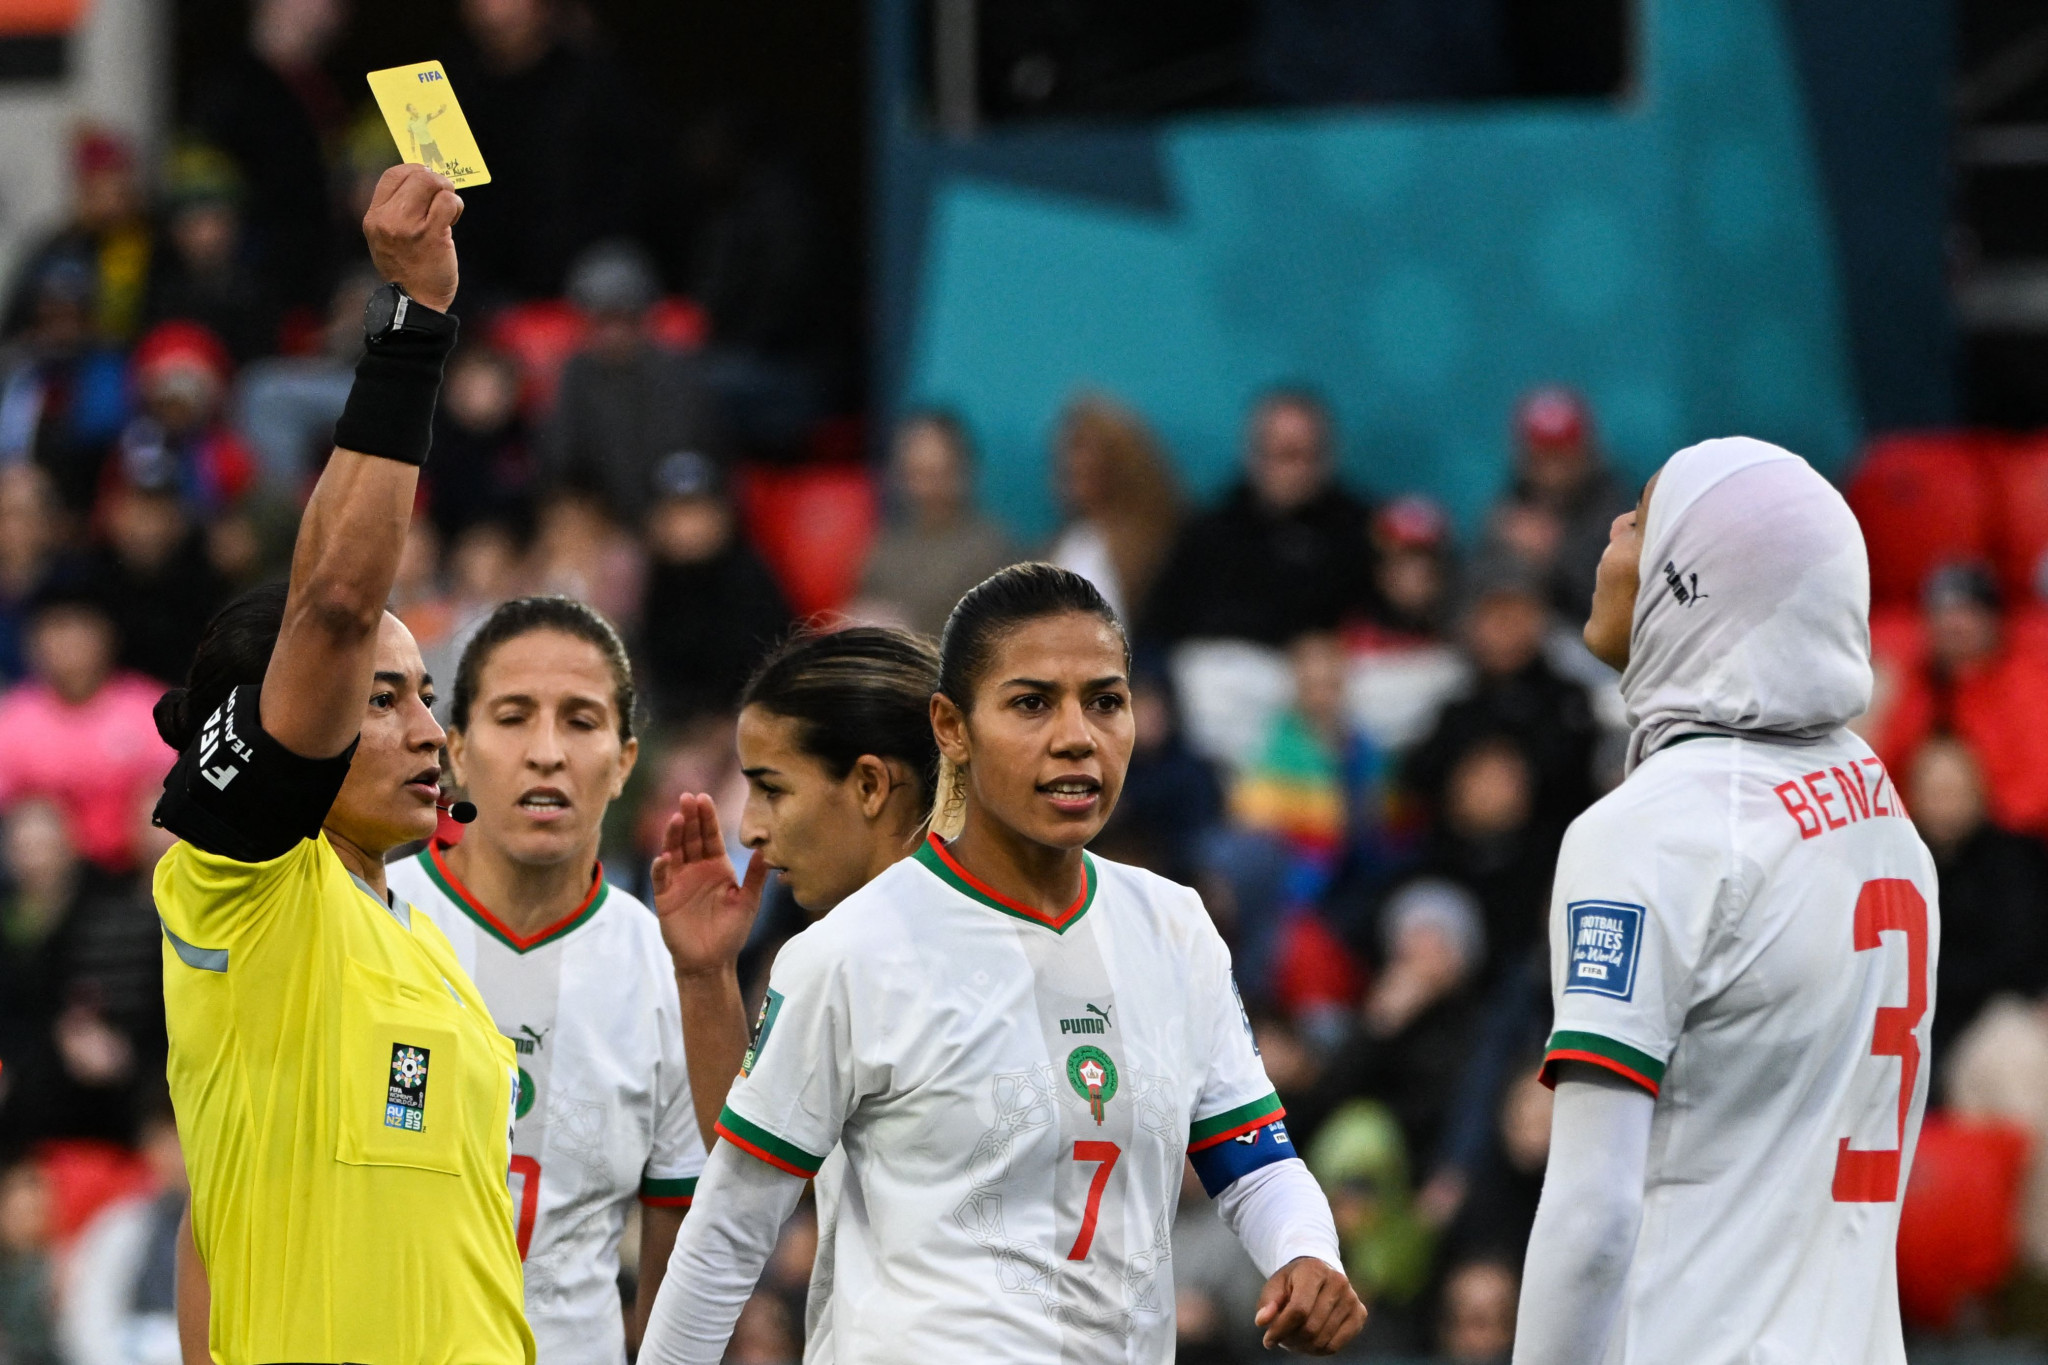 Nouhaila Benzina received a yellow card during her historic appearance in Morocco's 1-0 victory over South Korea at the FIFA Women's World Cup ©Getty Images